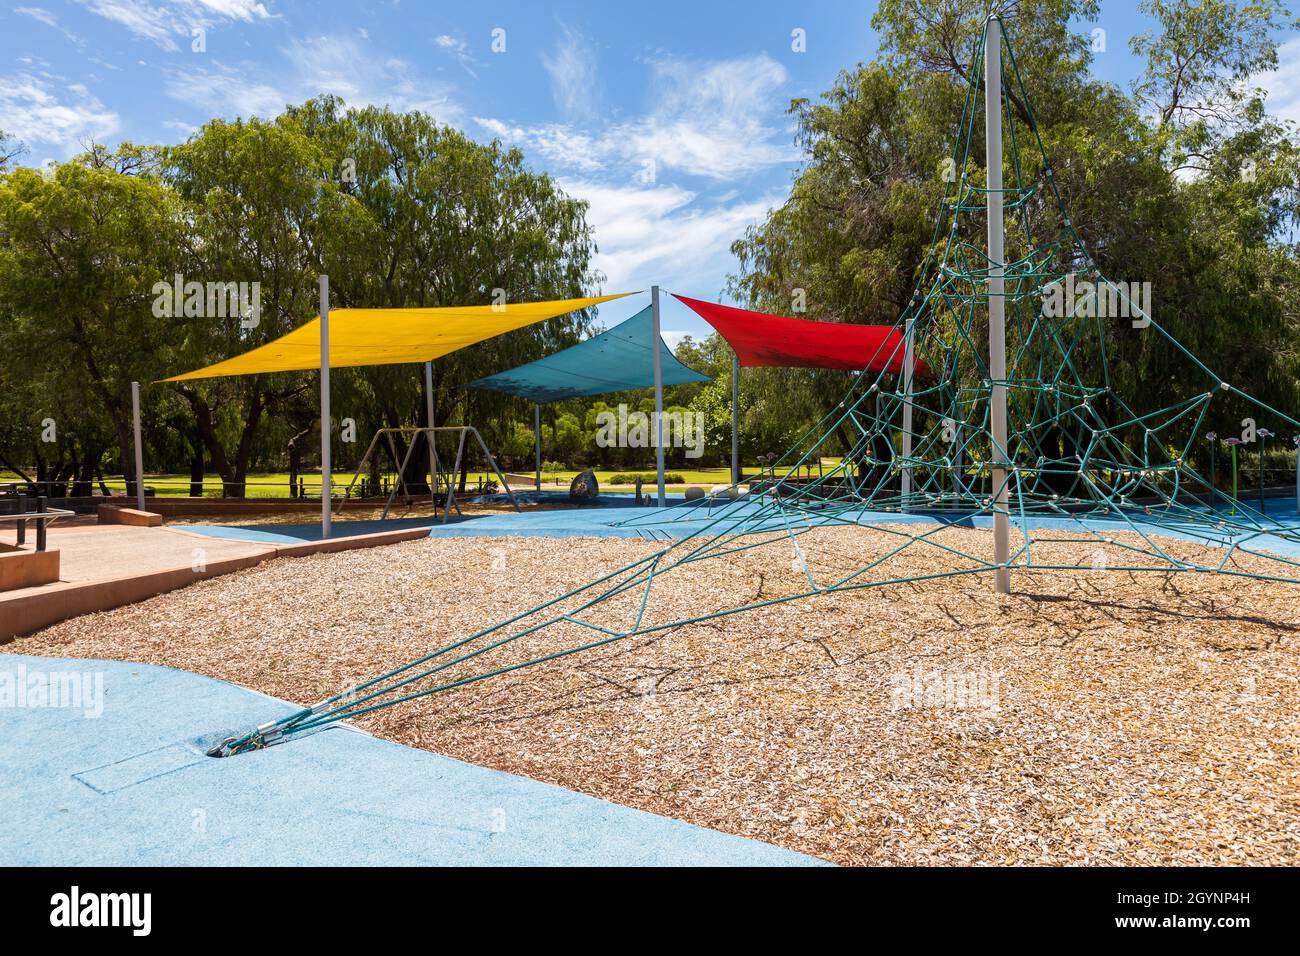 Childrens Playground with shade sails at Lakes Park Dalyellup, Western Australia Stock Photo